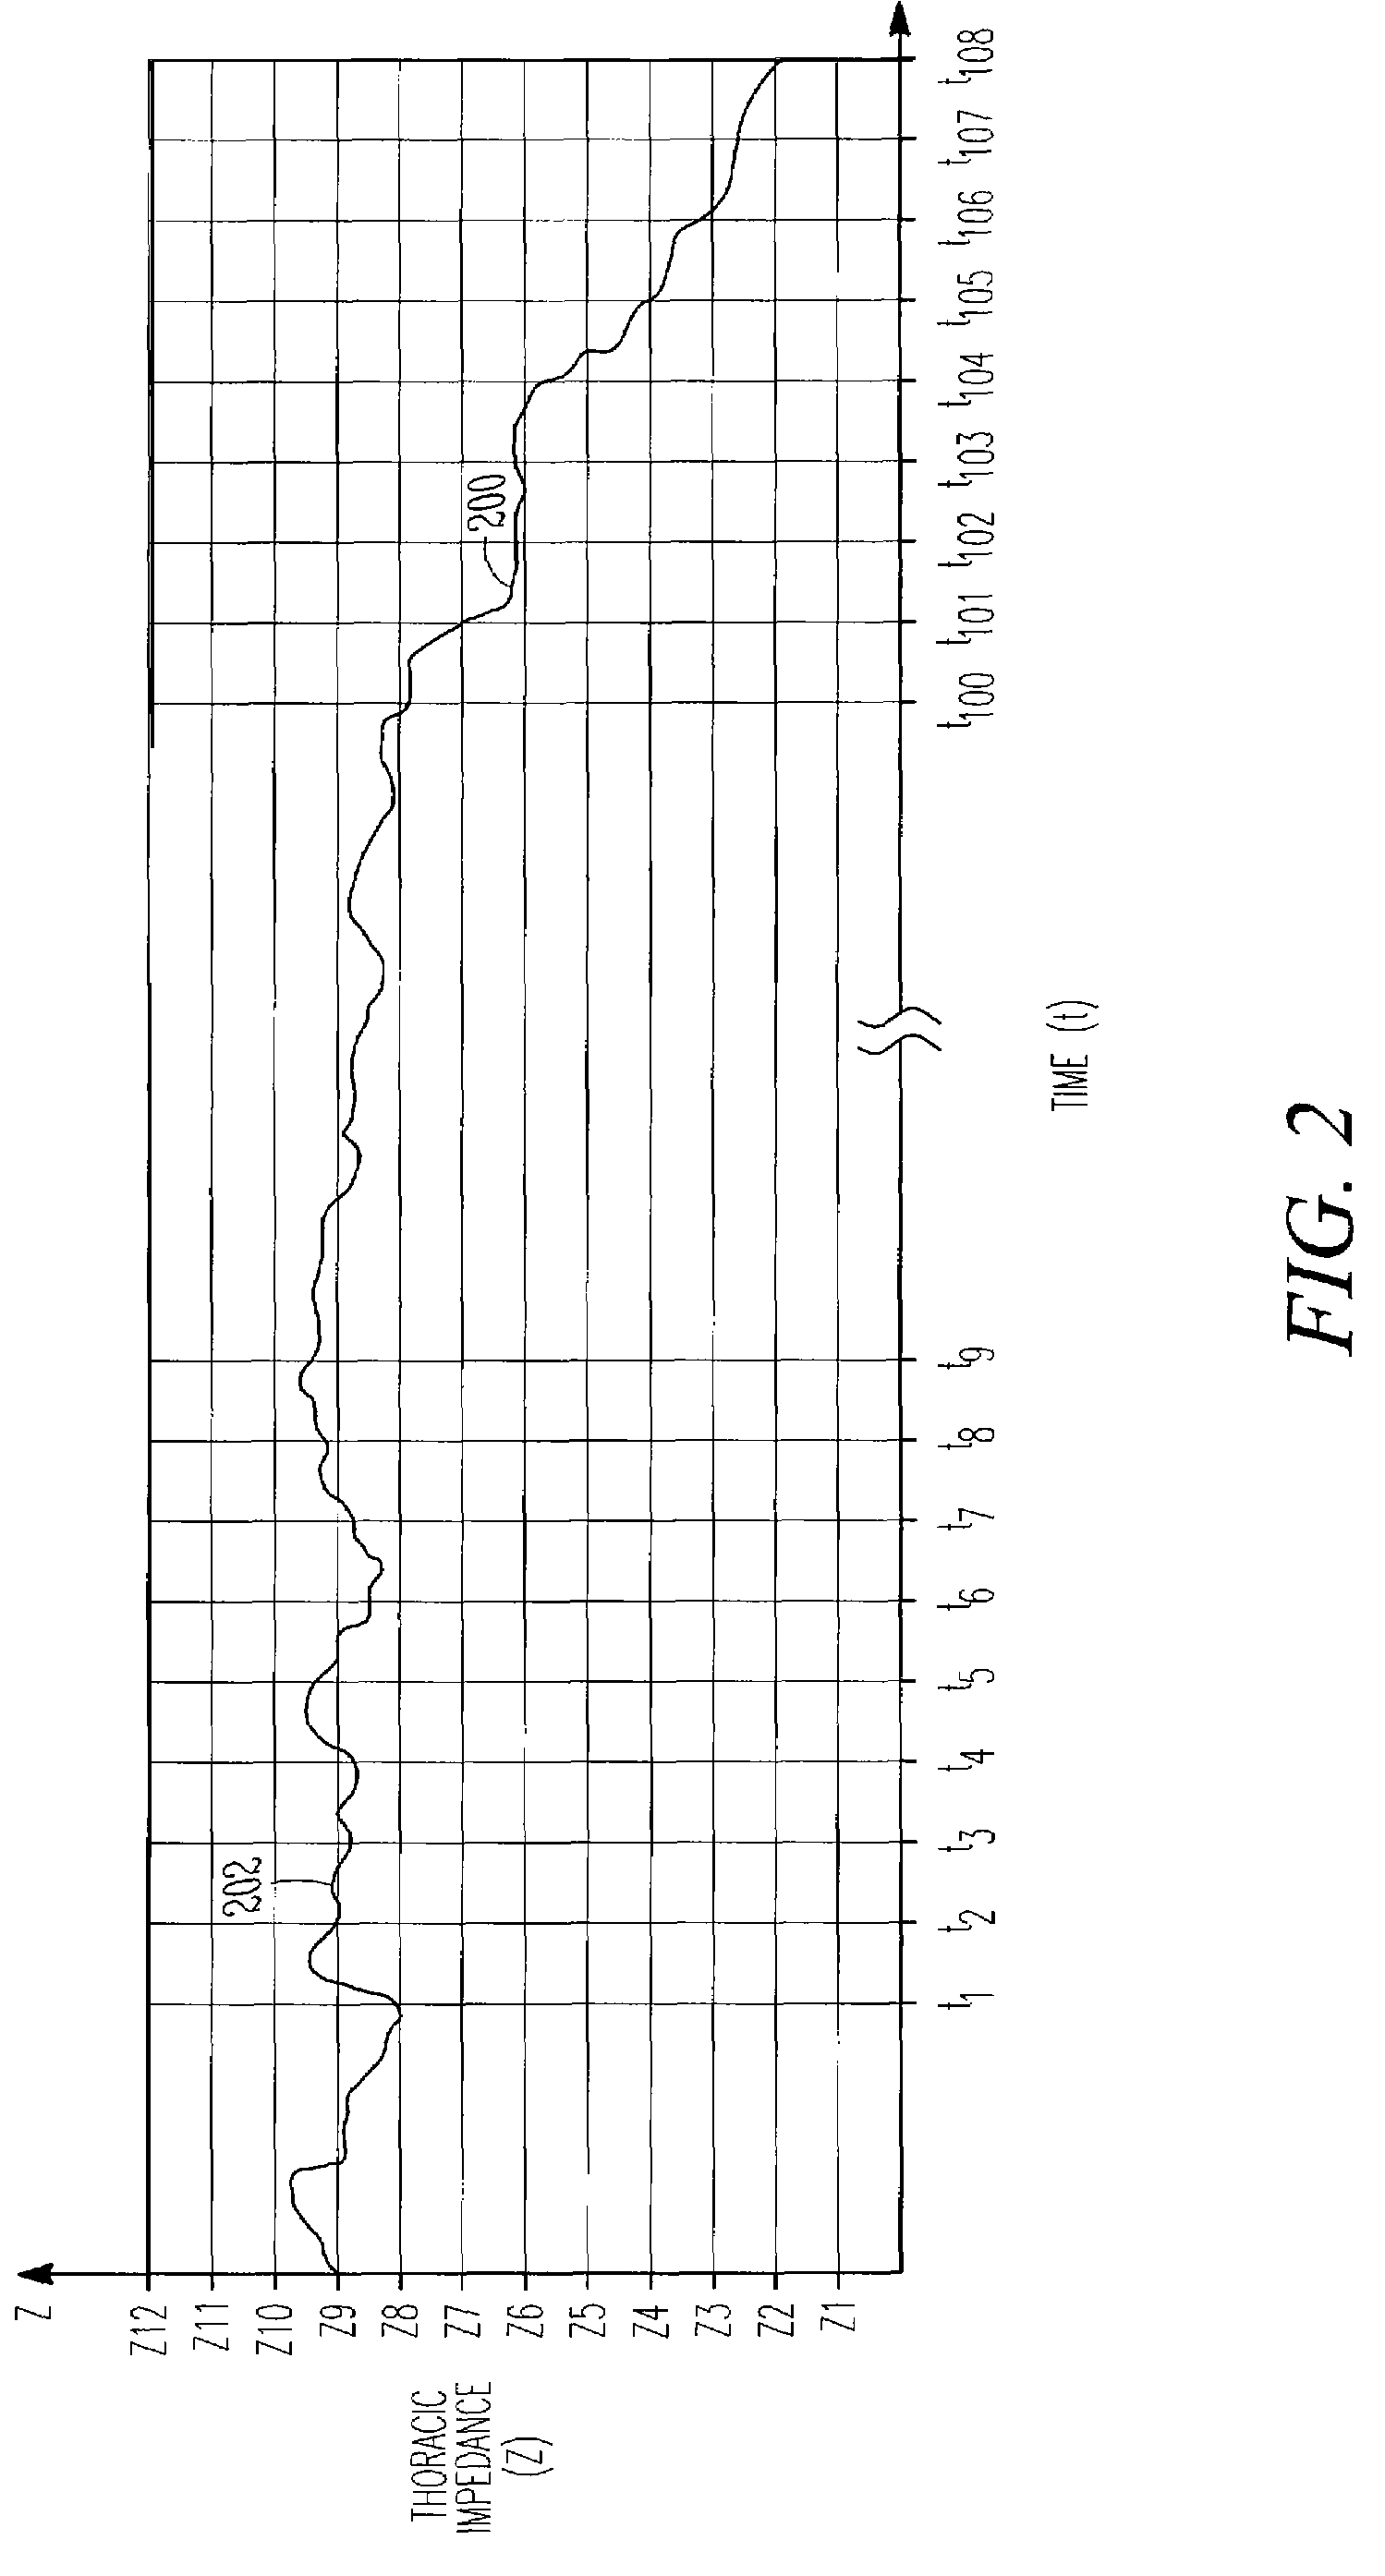 Monitoring fluid in a subject using an electrode configuration providing negative sensitivity regions